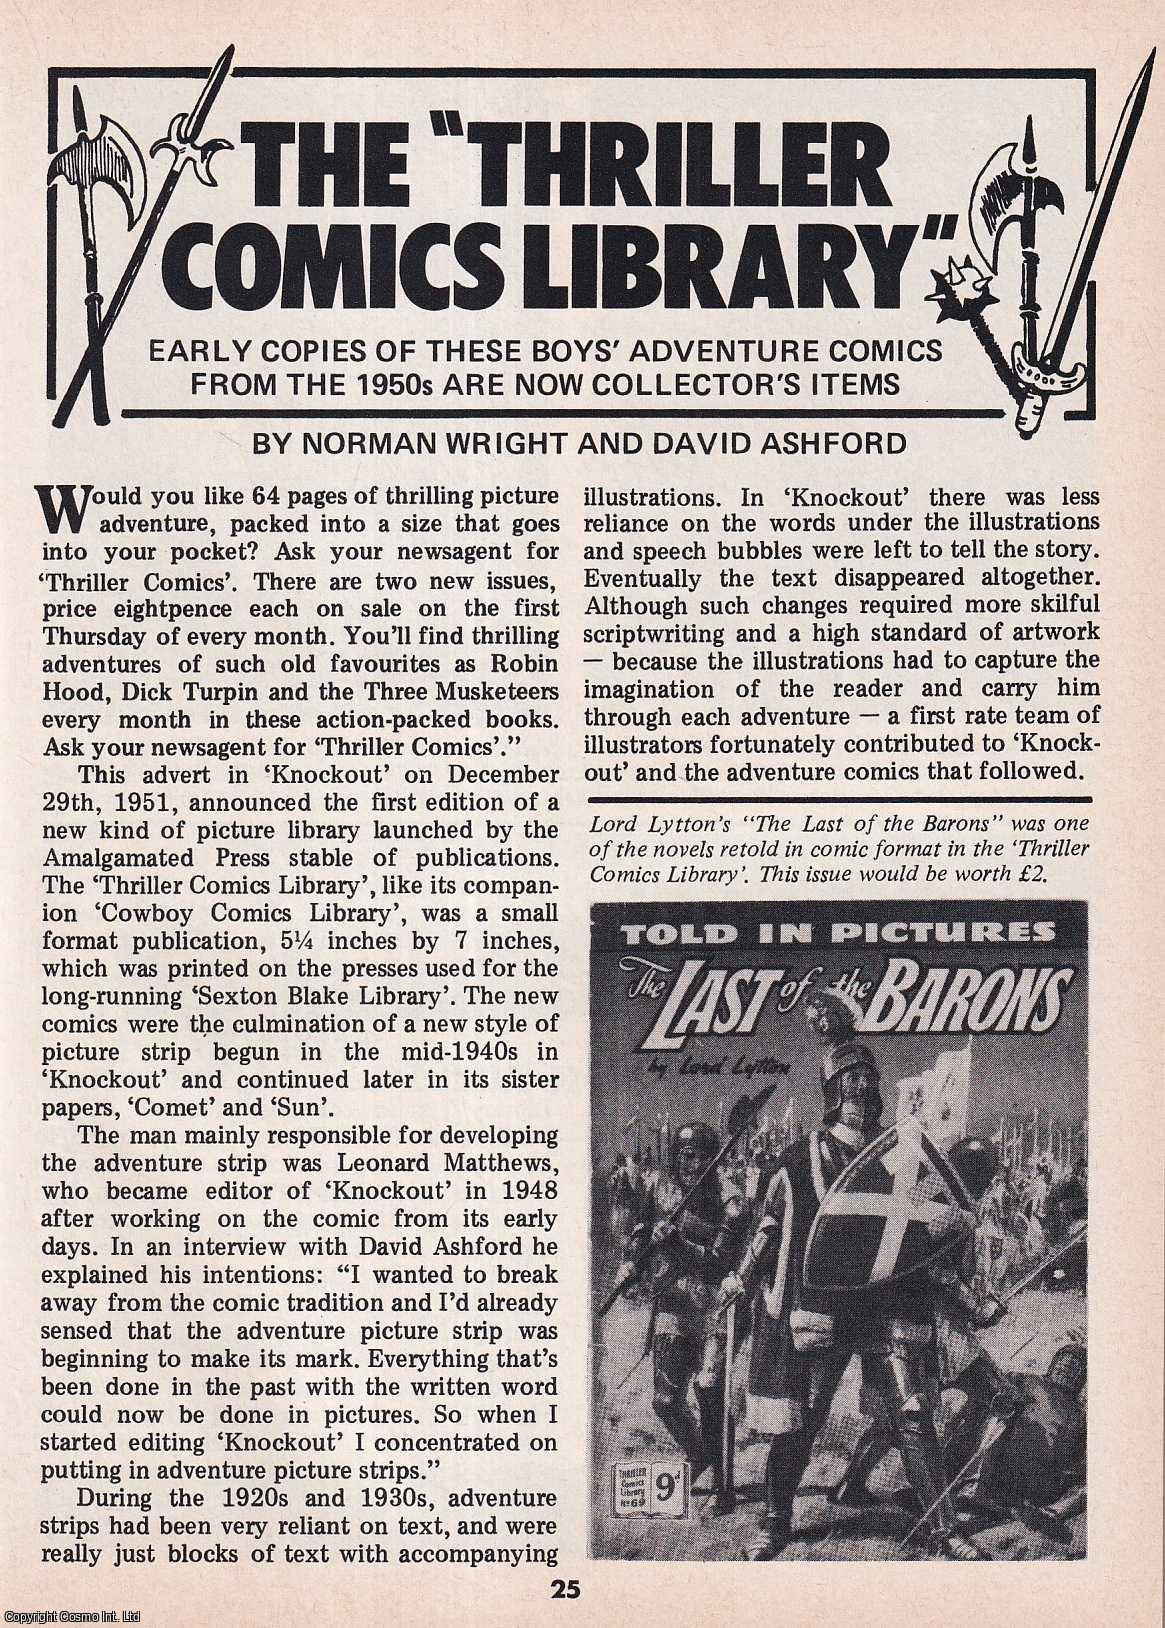 Norman Wright & David Ashford - The Thriller Comics Library. This is an original article separated from an issue of The Book & Magazine Collector publication.